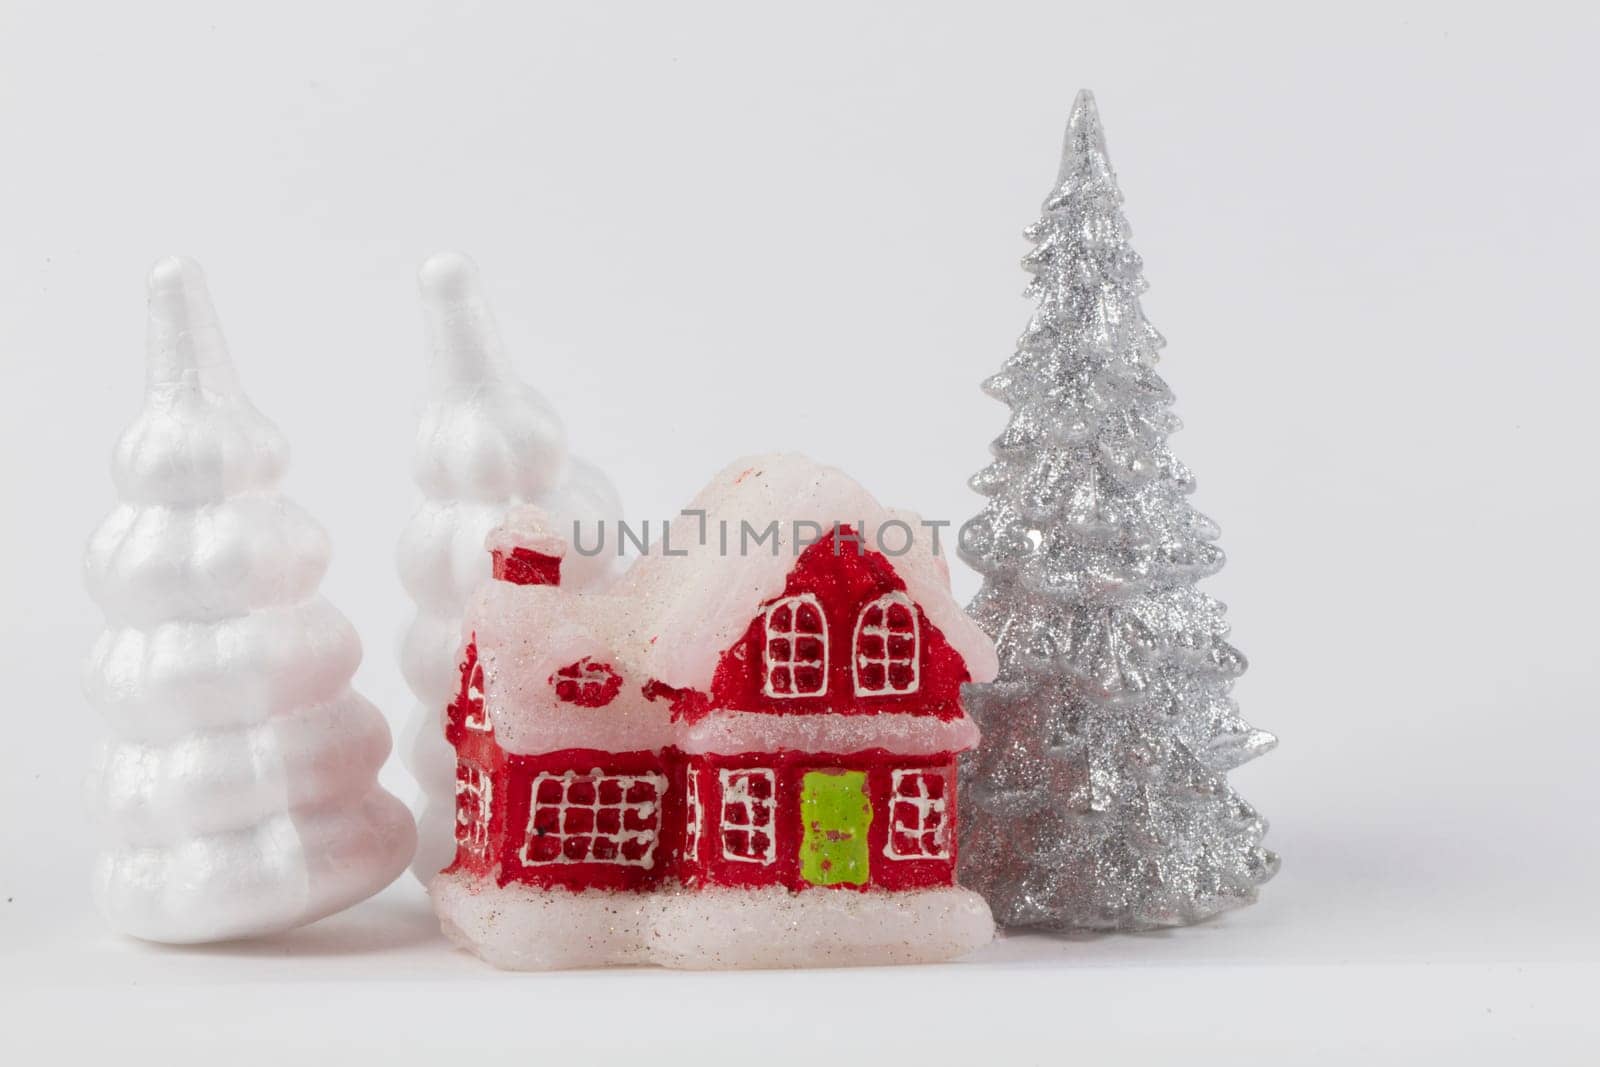 Christmas scene, miniature dacha village. Christmas little red houses, deer and snowy fir trees on a white background. Festive modern decorations. by Sviatlana